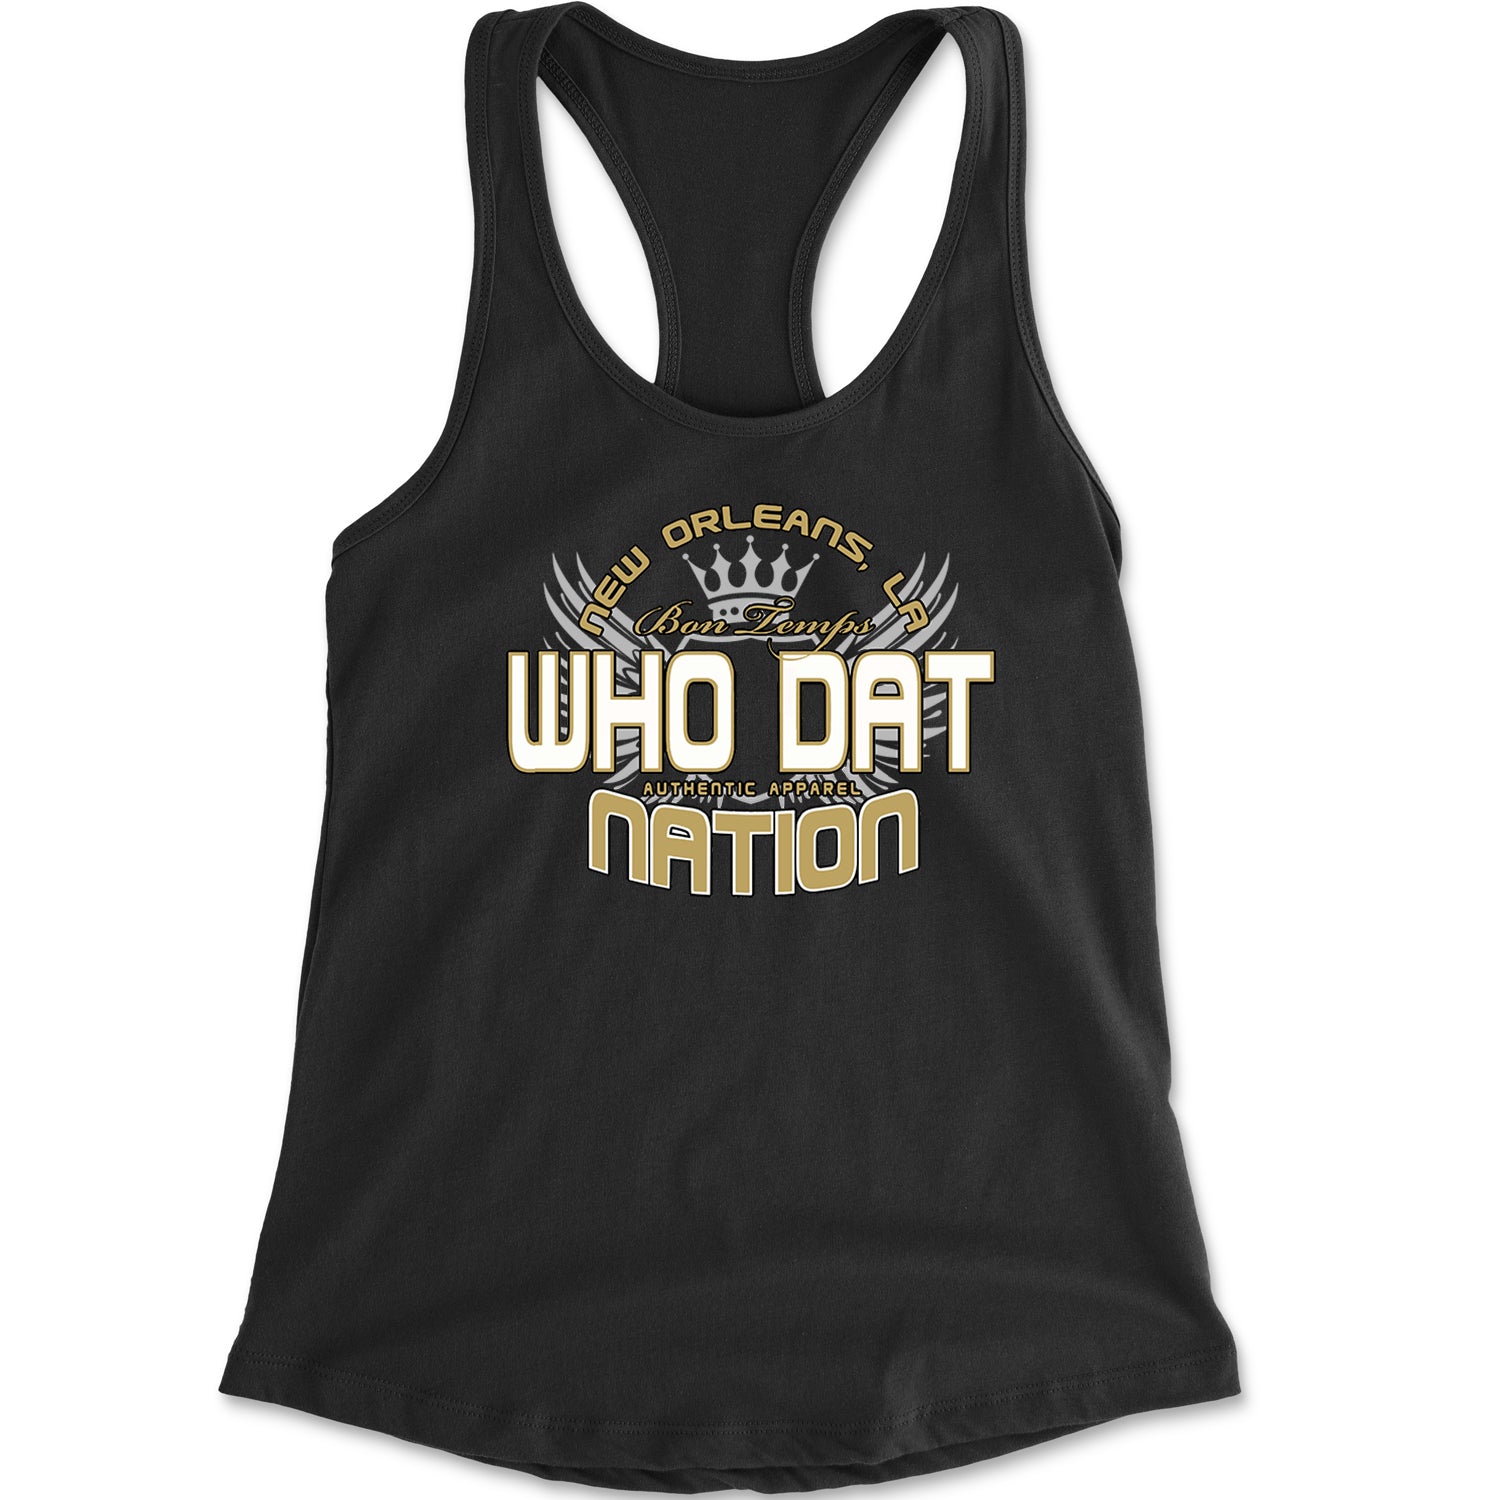 Who Dat Nation New Orleans (Color) Racerback Tank Top for Women